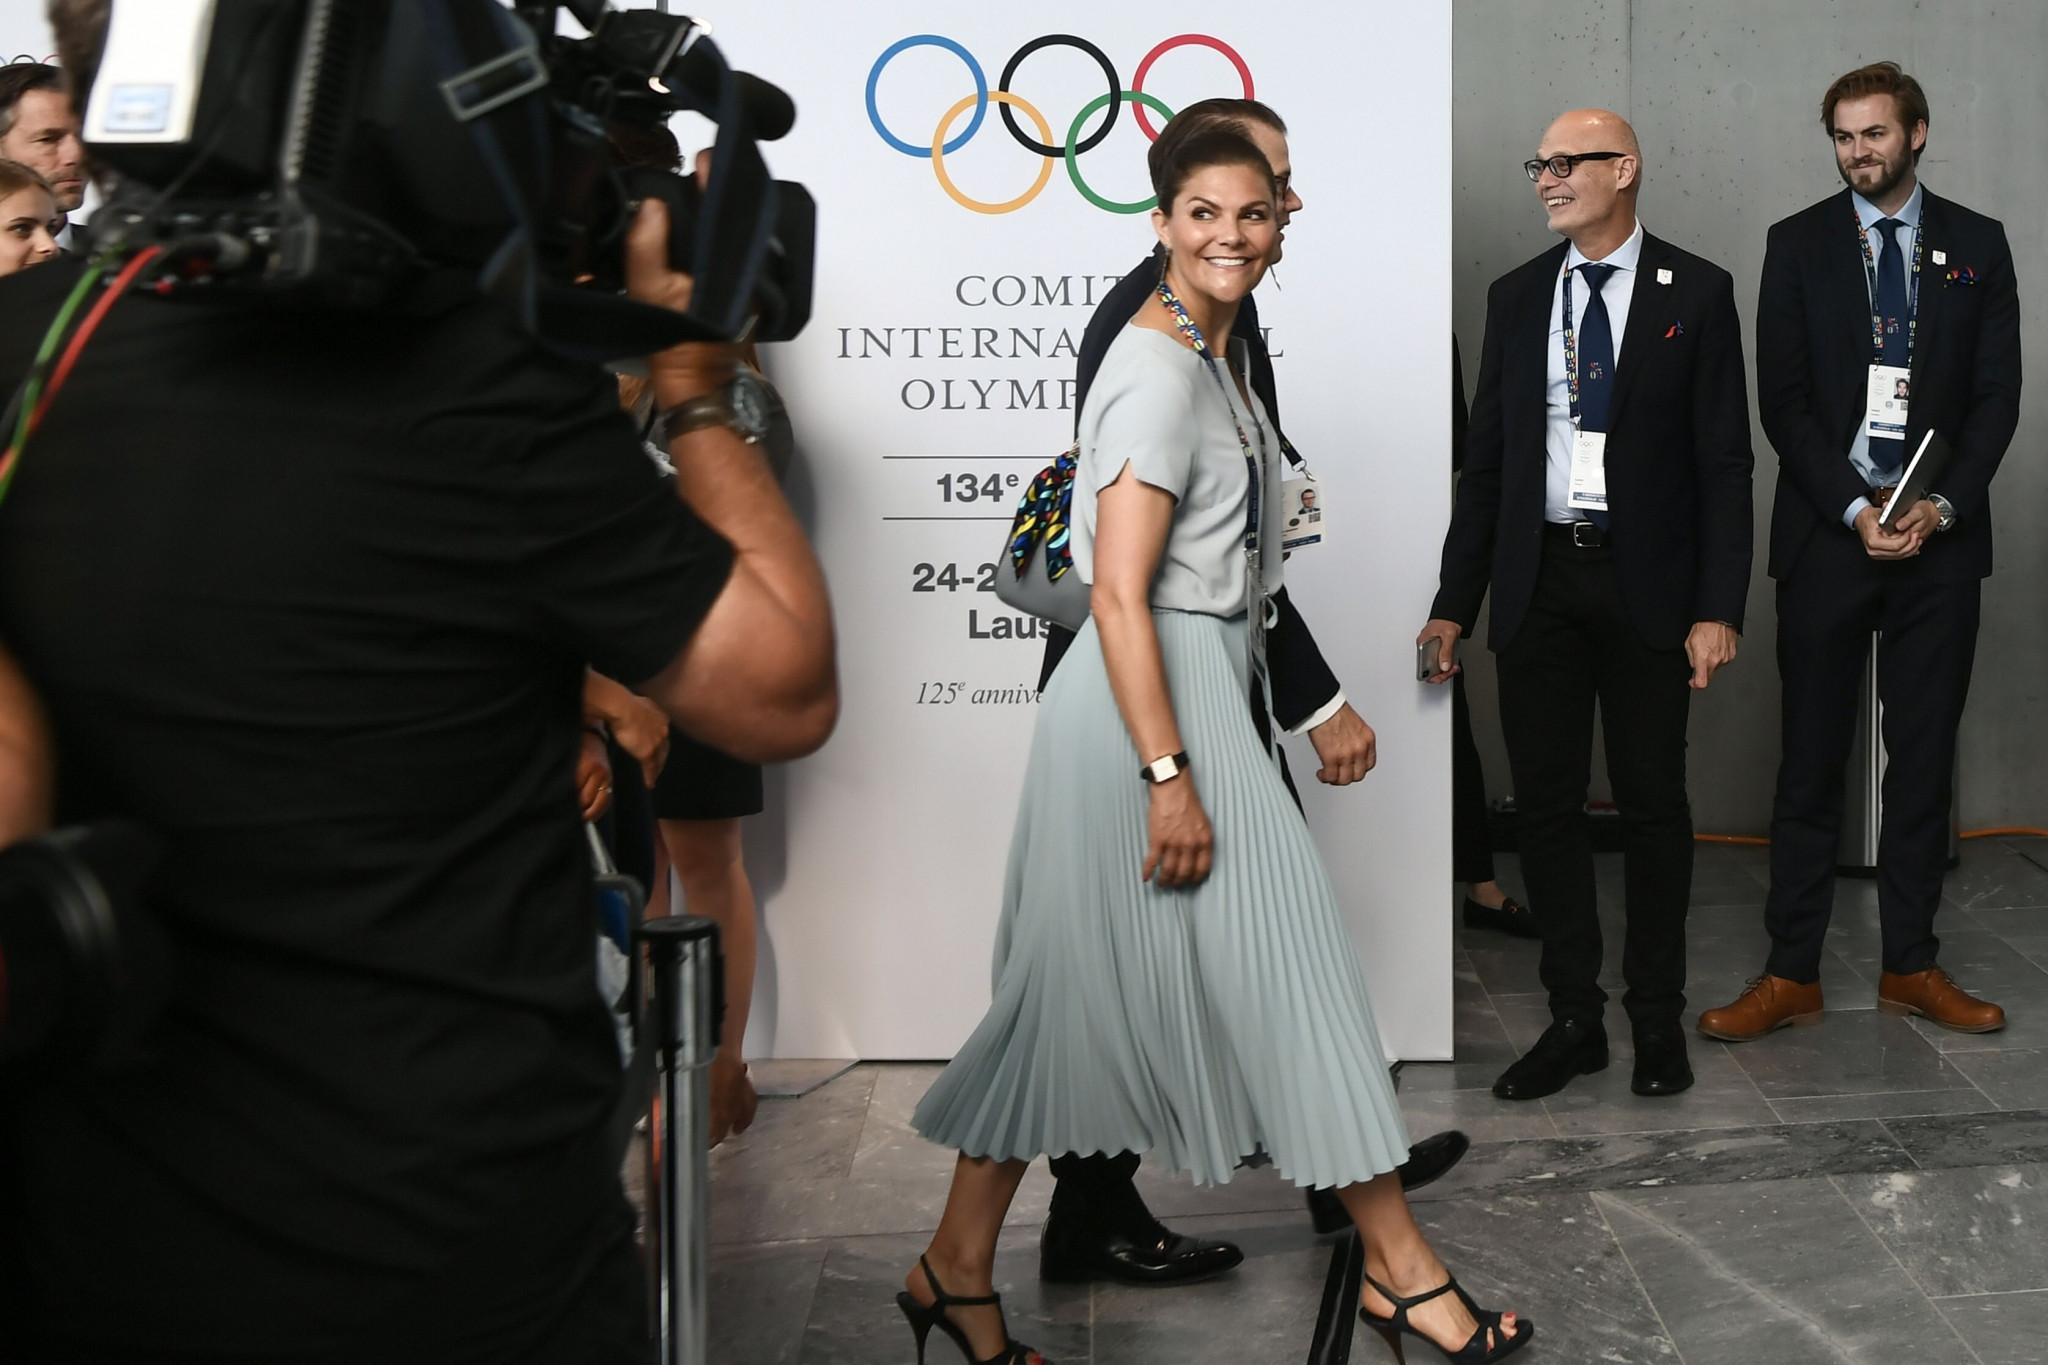 Sweden's Crown Princess Victoria arrives for the IOC Session at Swiss Tech Convention Center ©Getty Images